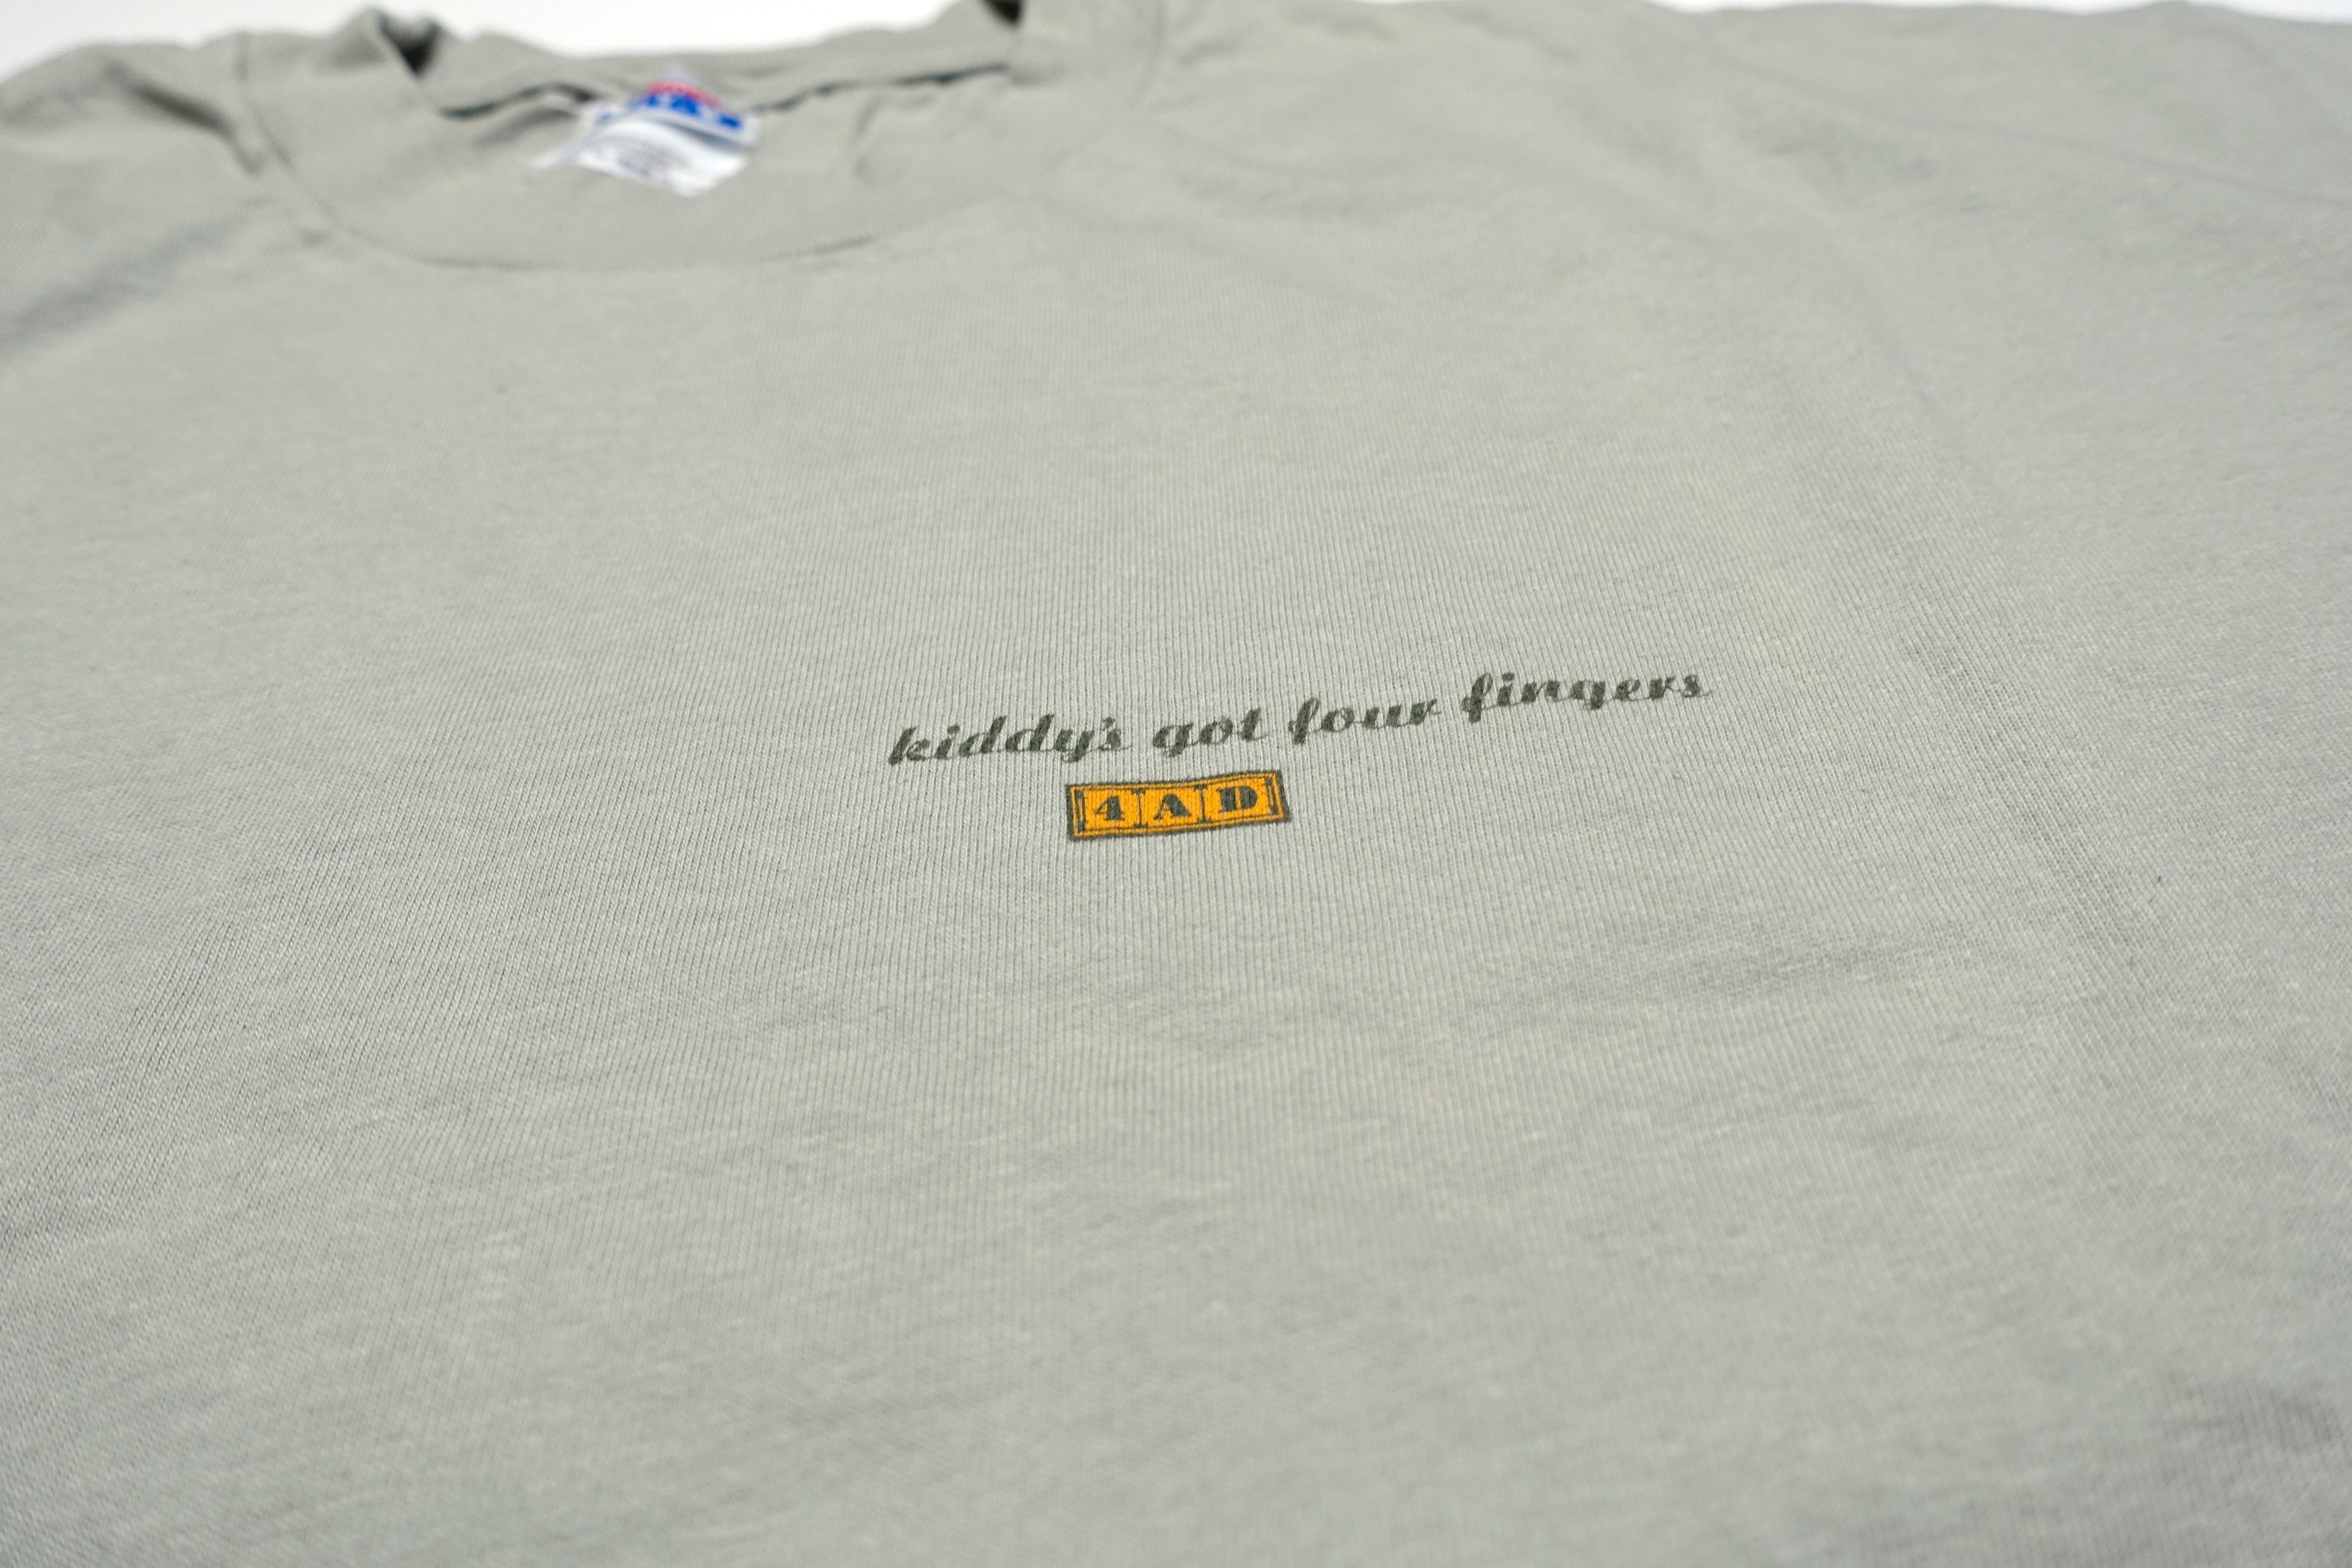 4AD - Kiddy's Got Four Fingers 1998 Compilation Shirt Size XL